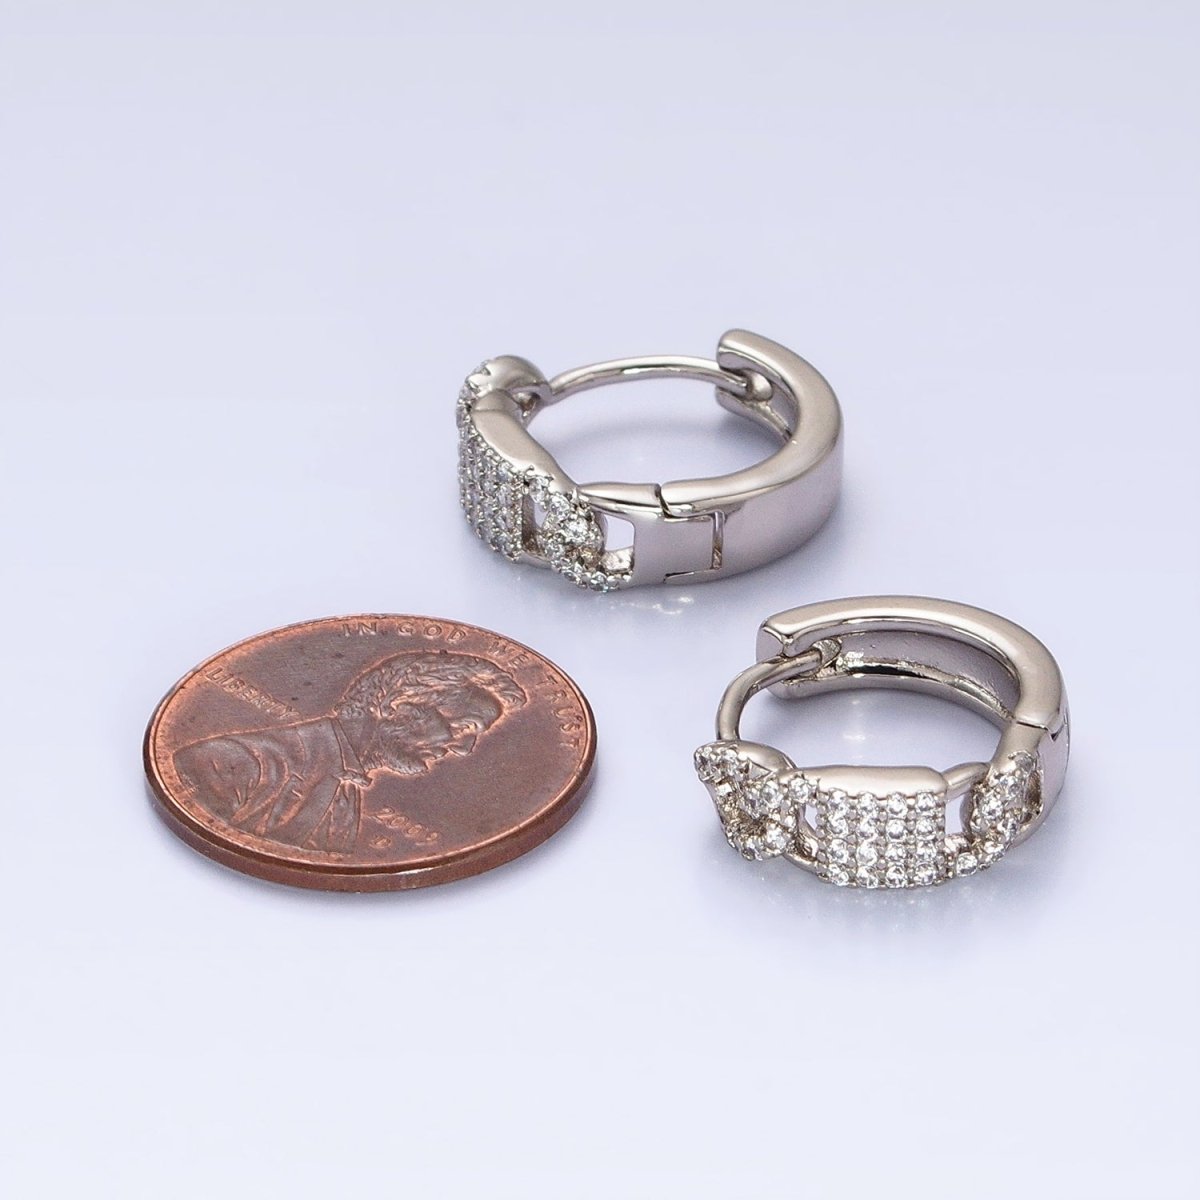 CZ Pave Huggie Hoops Silver Earrings with CZ Diamonds, Thick Huggie Earrings AB787 - DLUXCA